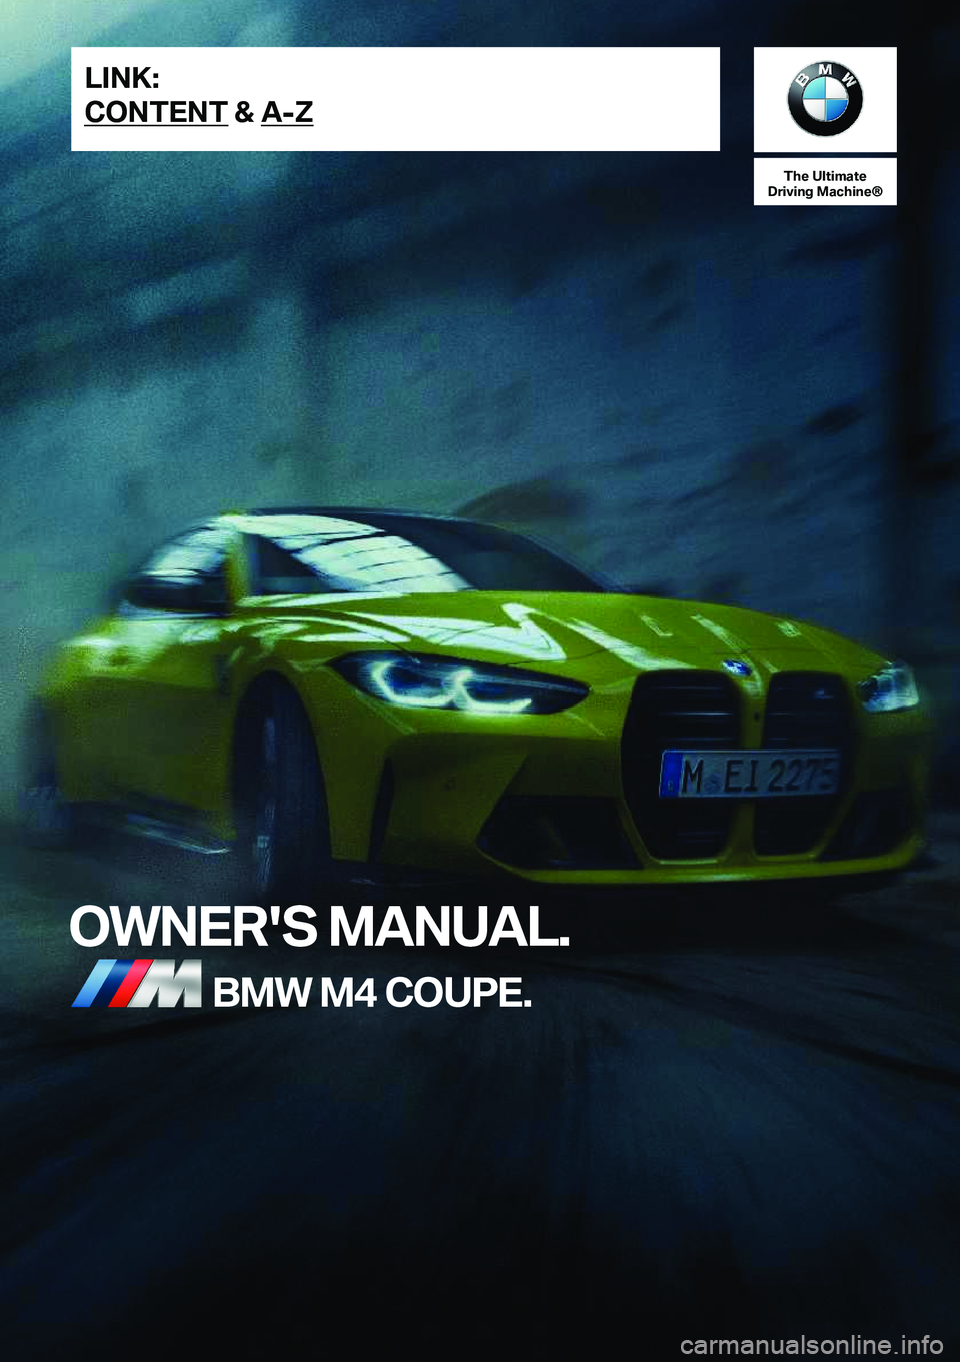 BMW M4 2022  Owners Manual �T�h�e��U�l�t�i�m�a�t�e
�D�r�i�v�i�n�g��M�a�c�h�i�n�e�n
�O�W�N�E�R�'�S��M�A�N�U�A�L�.�B�M�W��M�4��C�O�U�P�E�.�L�I�N�K�:
�C�O�N�T�E�N�T��&��A�-�Z�O�n�l�i�n�e��E�d�i�t�i�o�n��f�o�r��P�a�r�